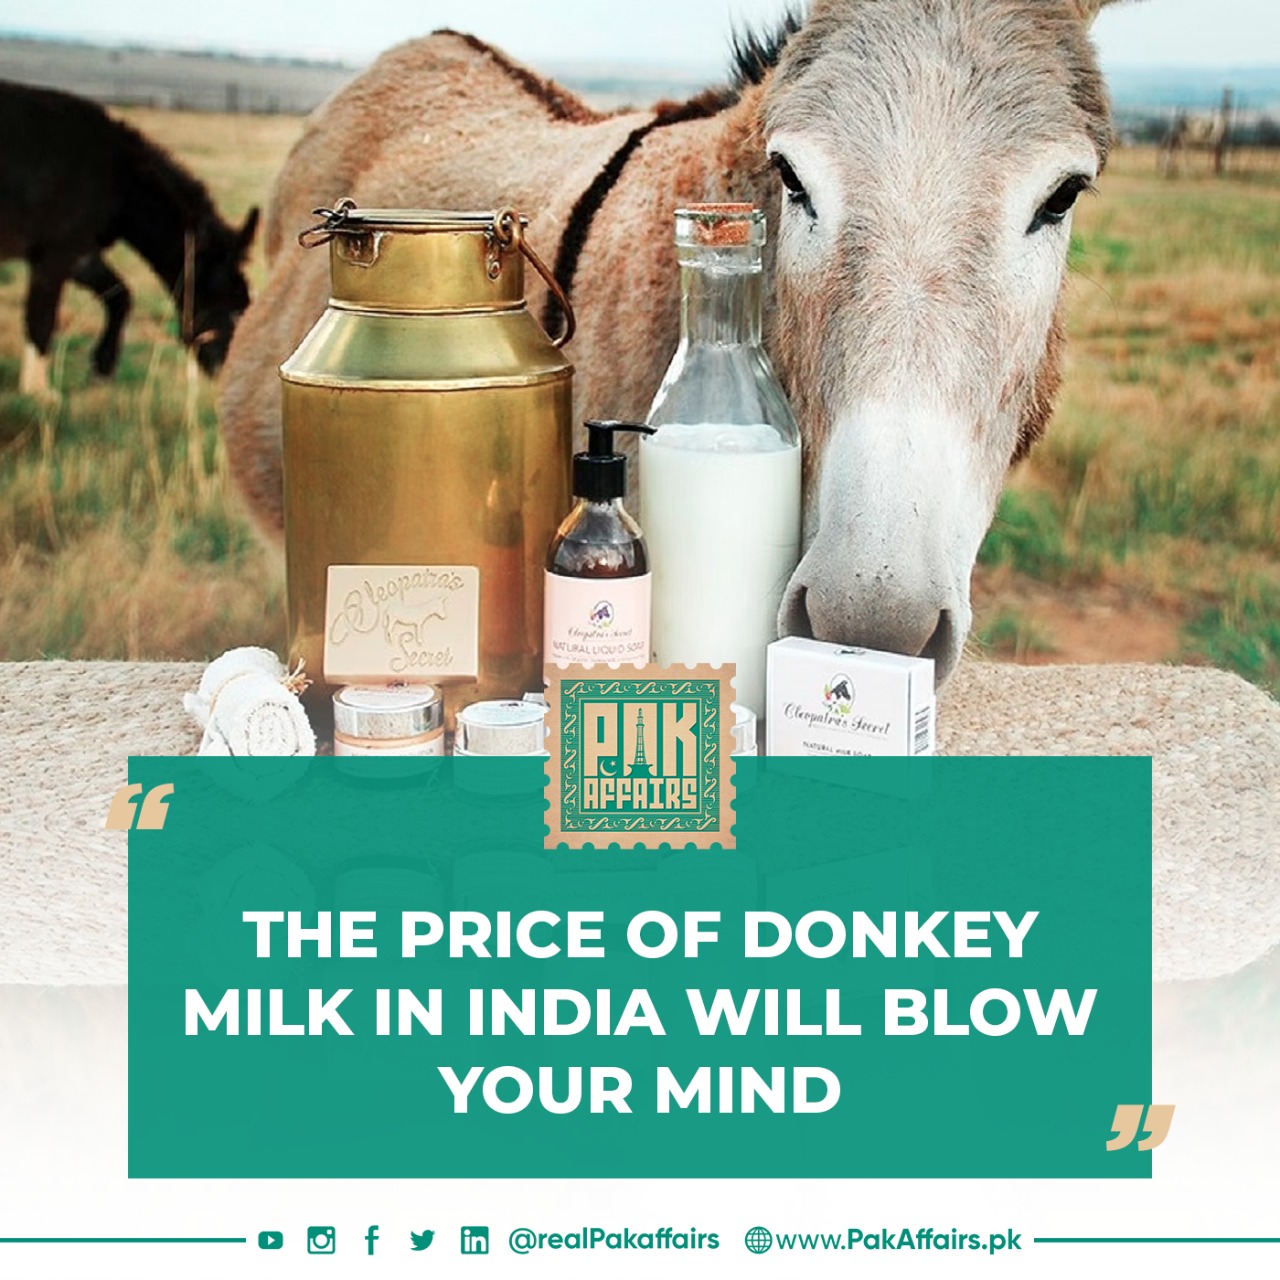 The price of donkey milk in India will blow your mind